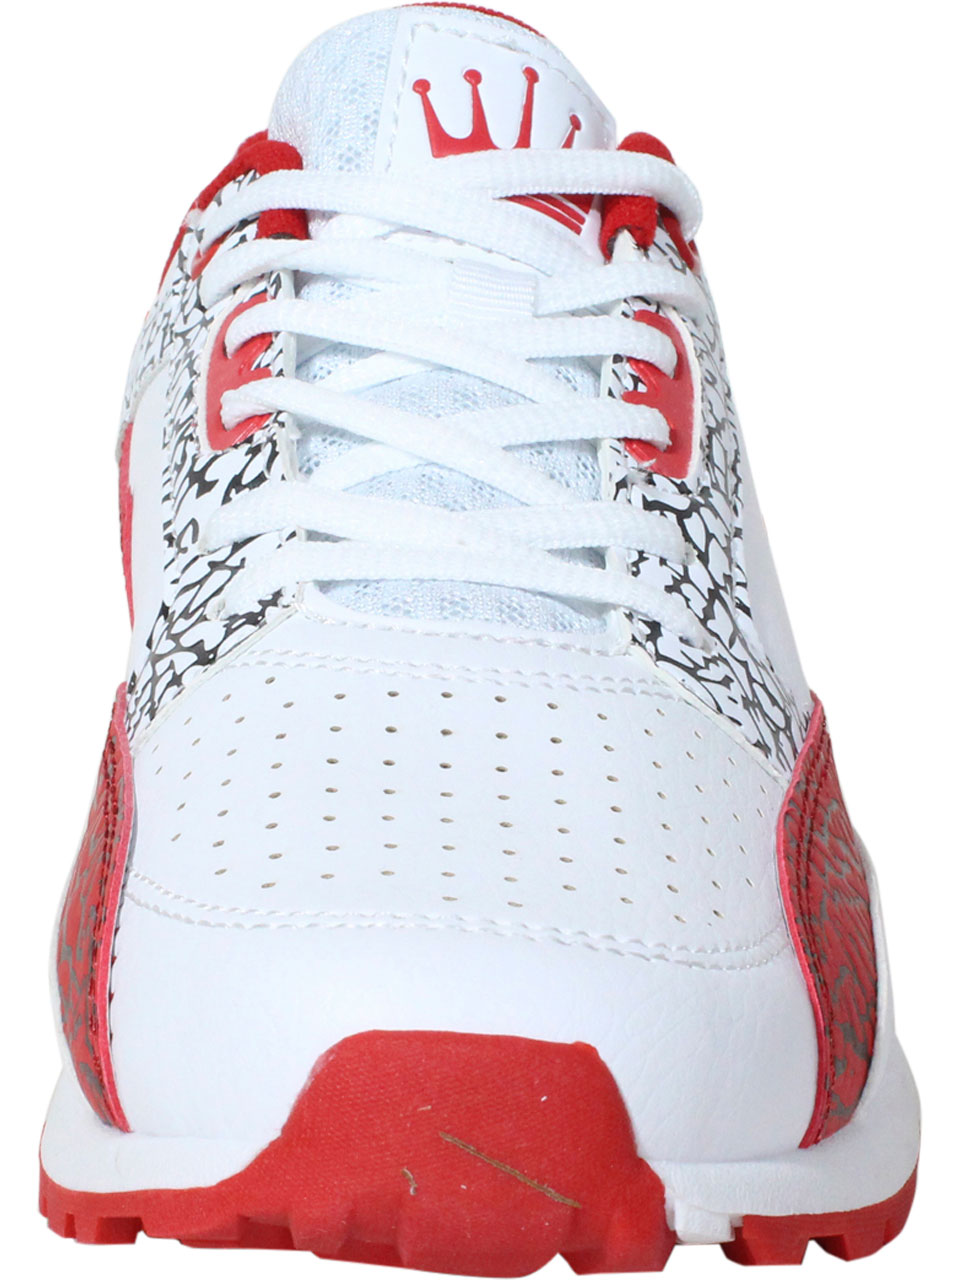 Troop Arrow Jogger White/Red/Black 